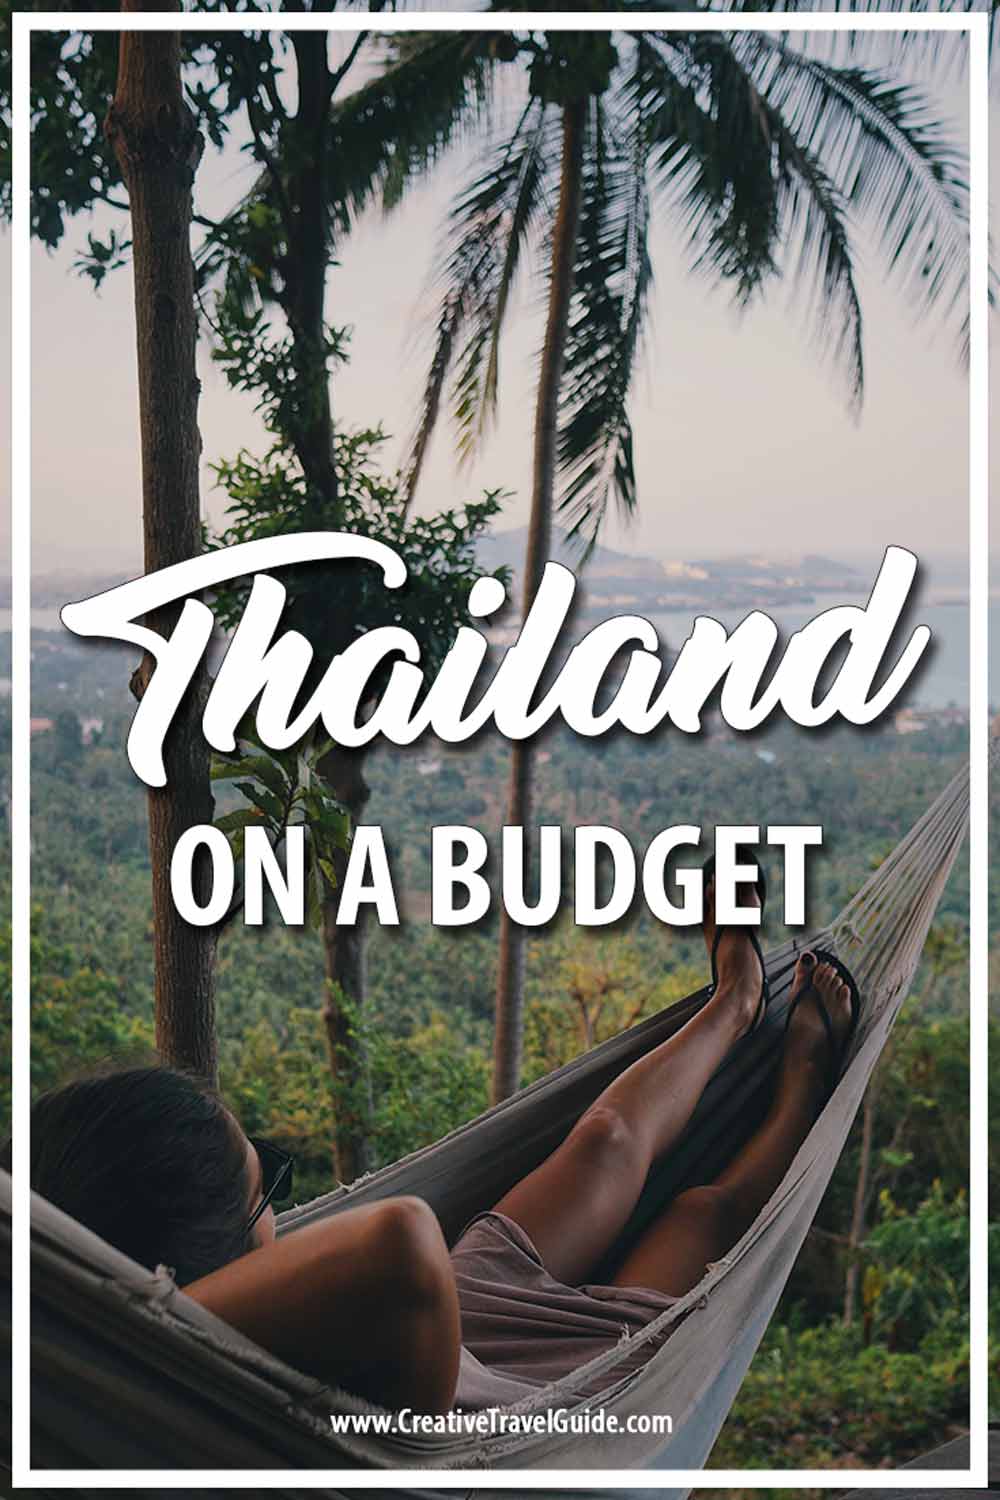 Thailand on a budget